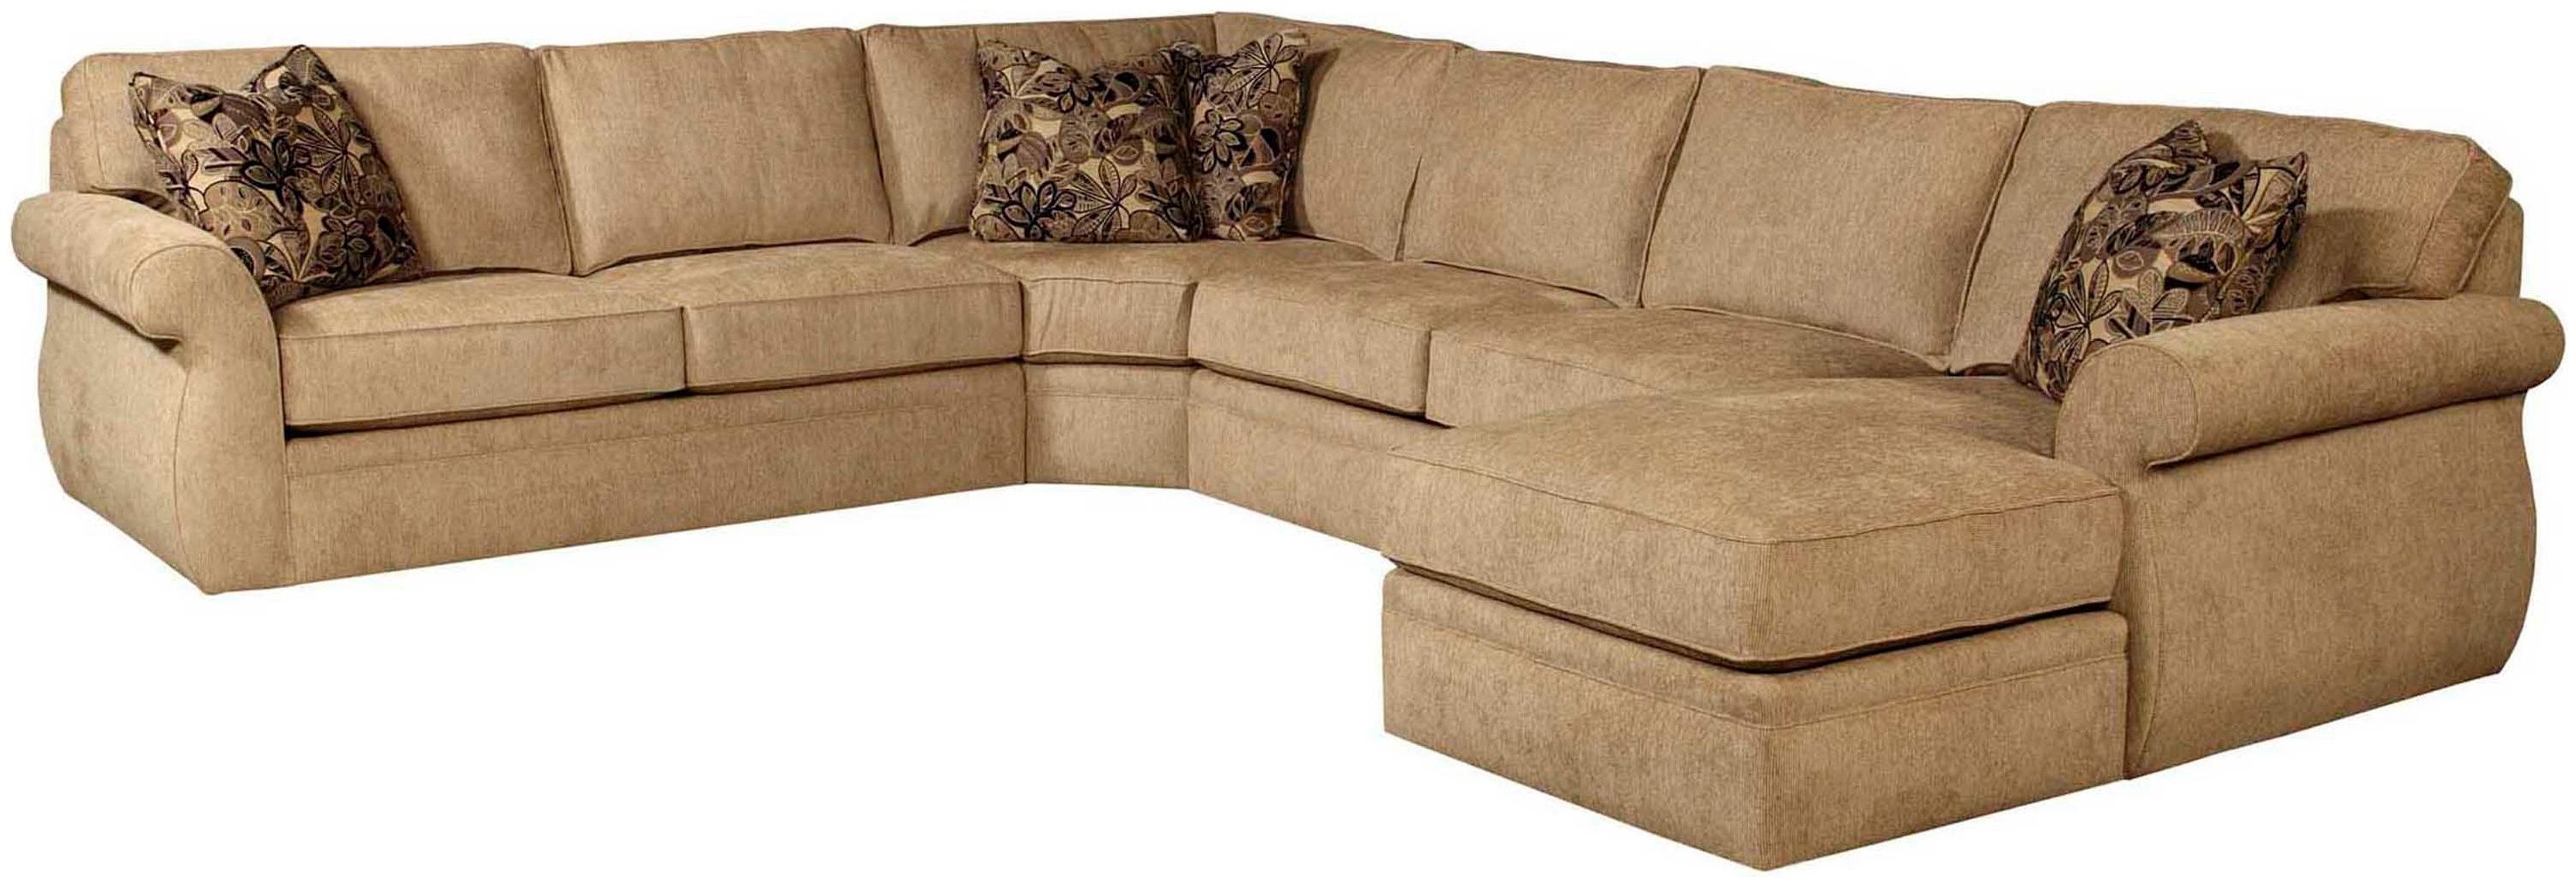 Most Popular Sectionals With Chaise Lounge Inside Furniture: Chaise Sofa Sectional Chaise Sectional (View 6 of 15)